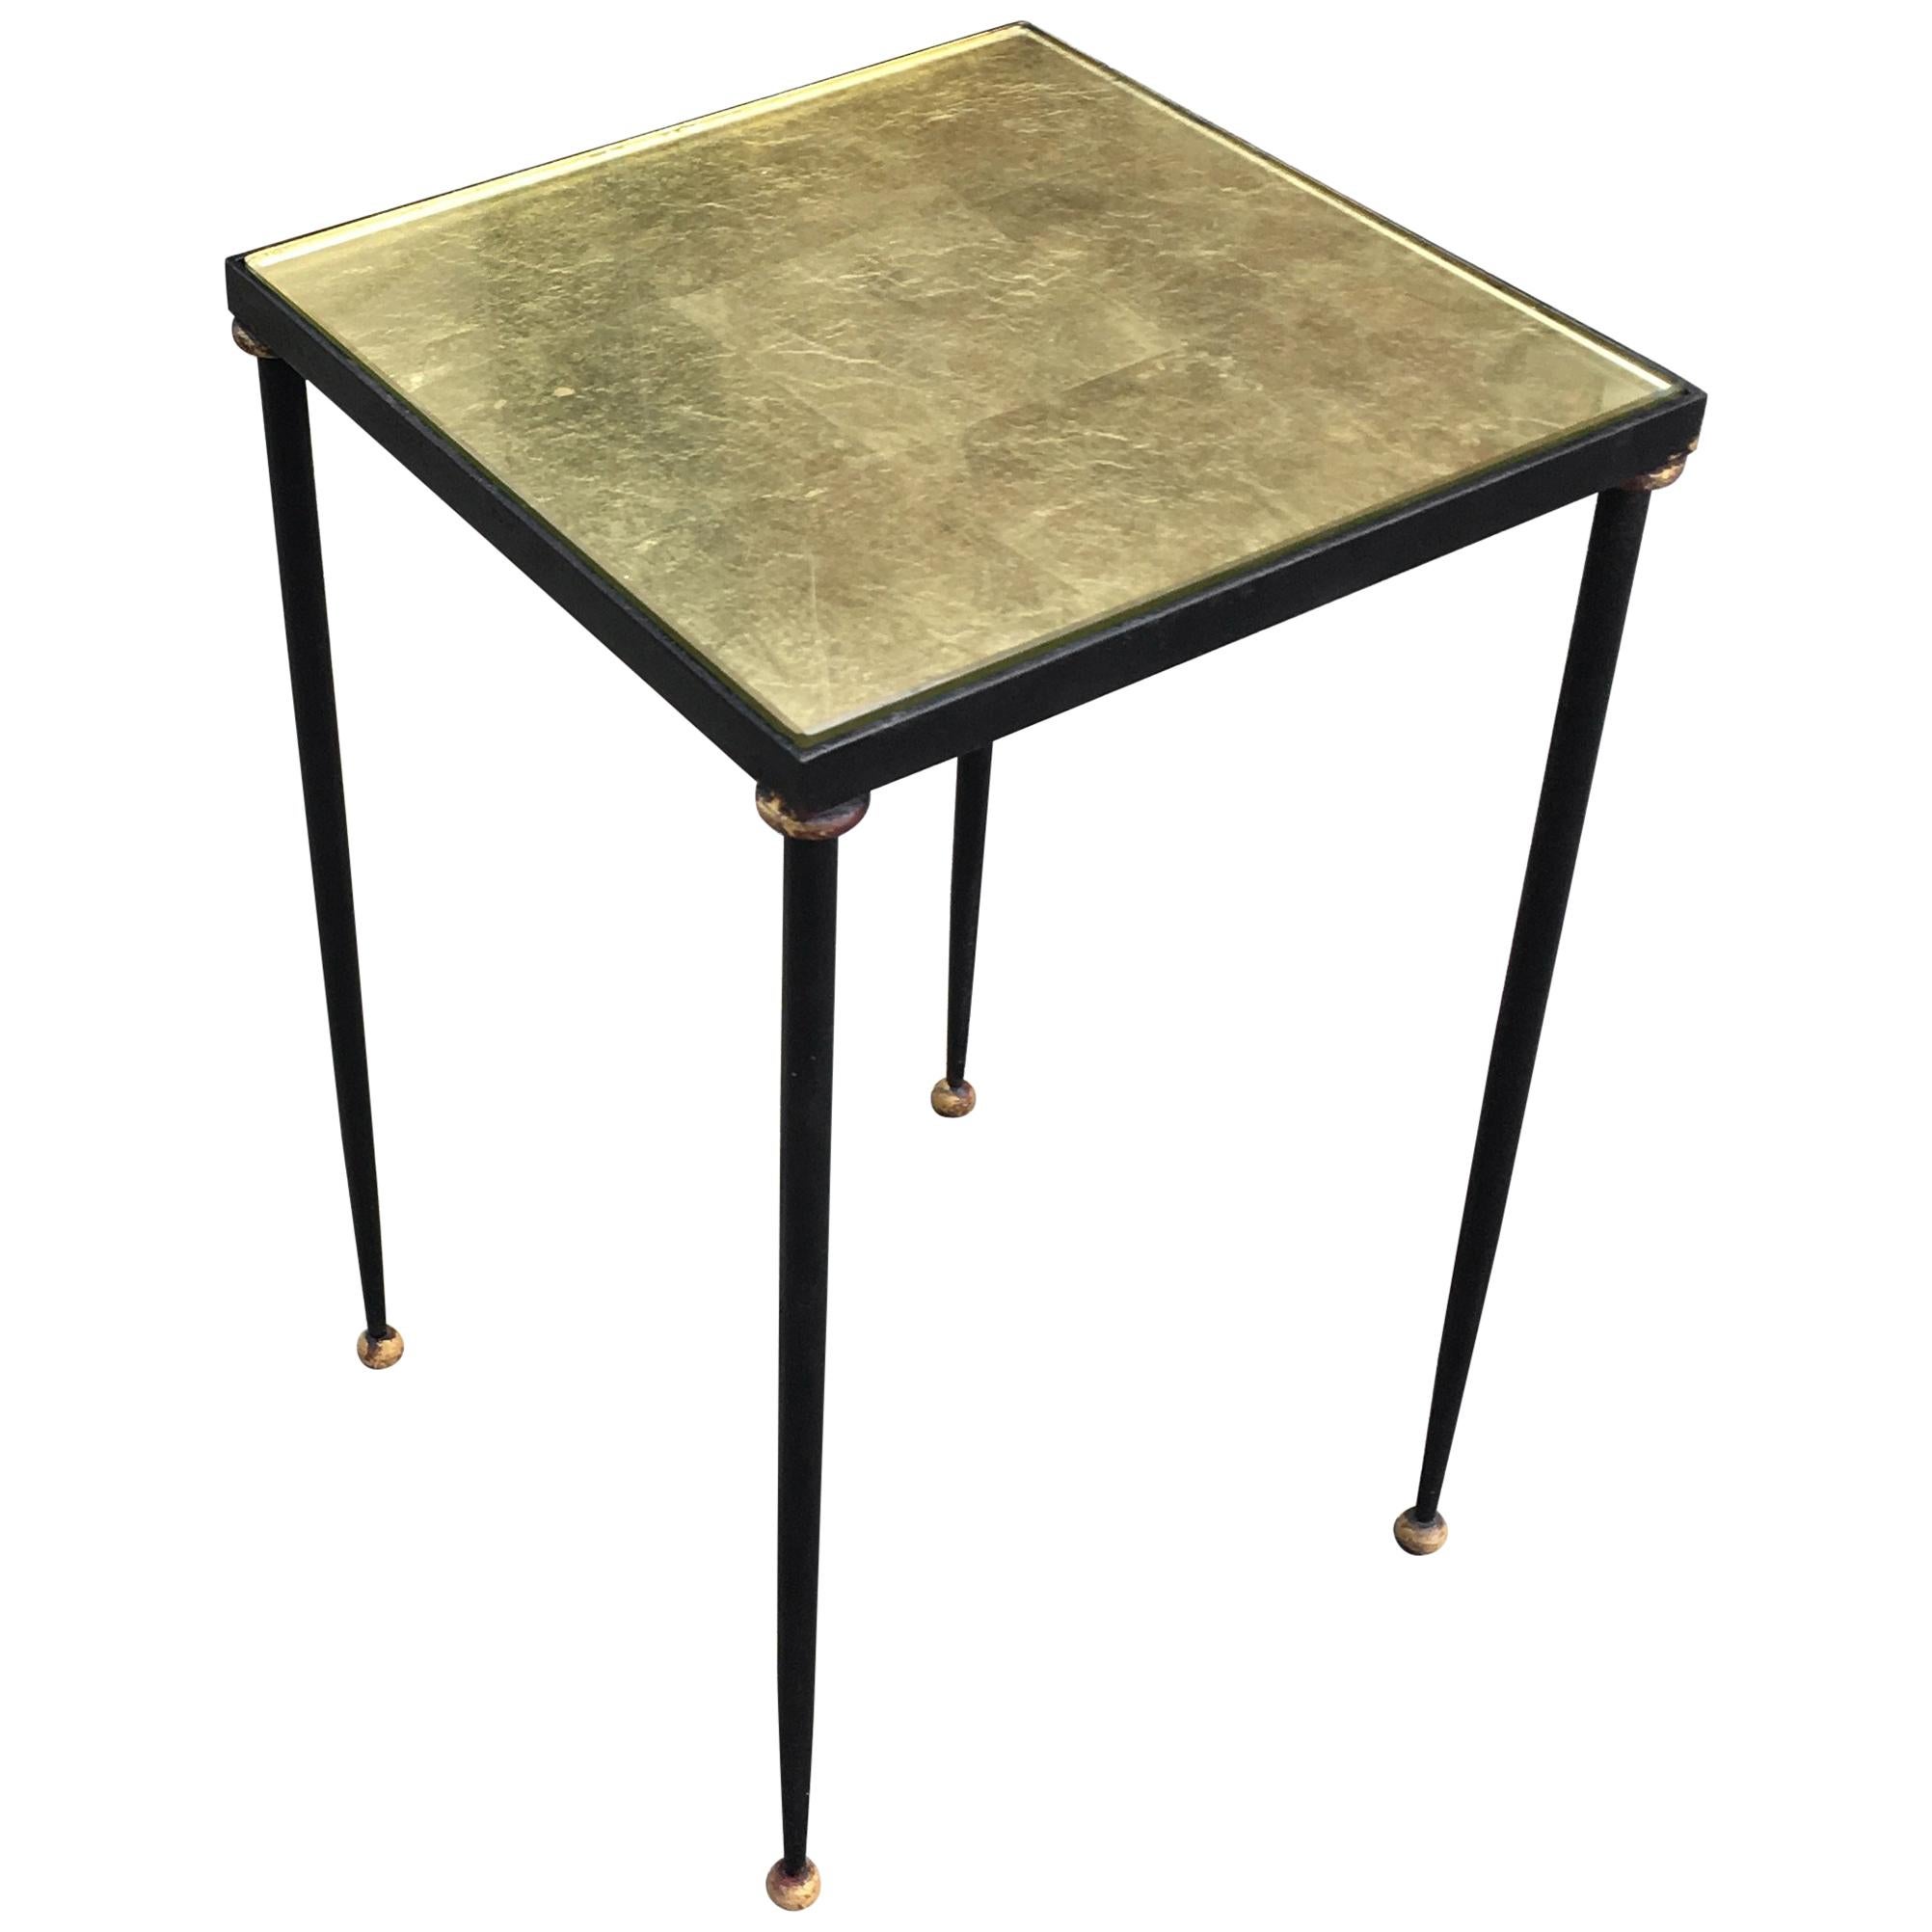 René Prou, Elegant Side Table in Lacquered and Gilded Metal, circa 1940